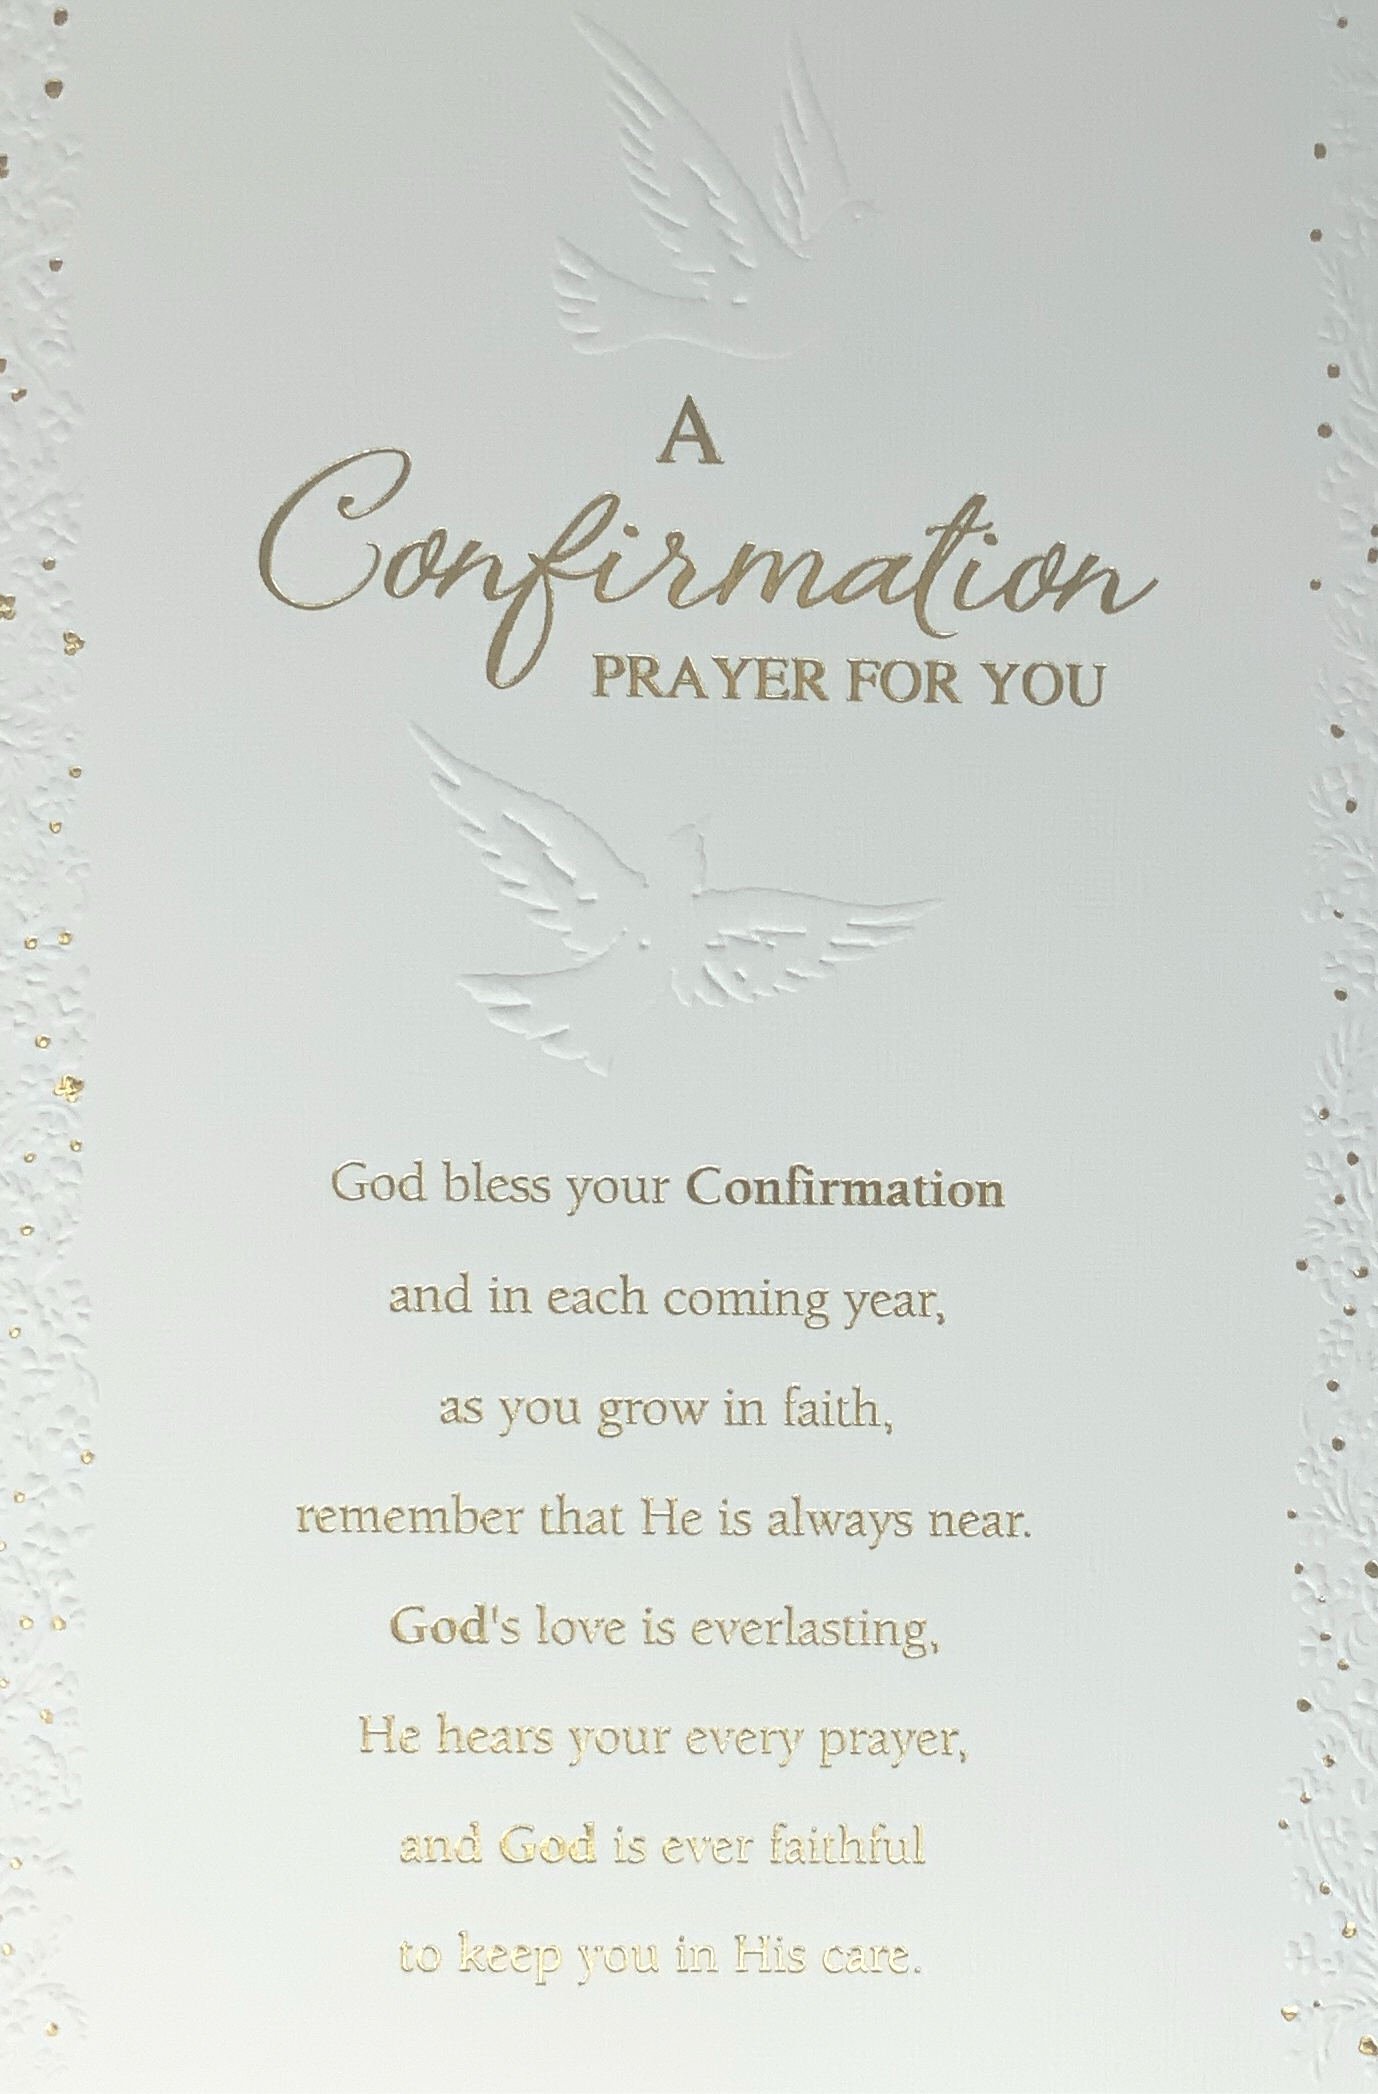 Confirmation Card - A Confirmation Prayer For You